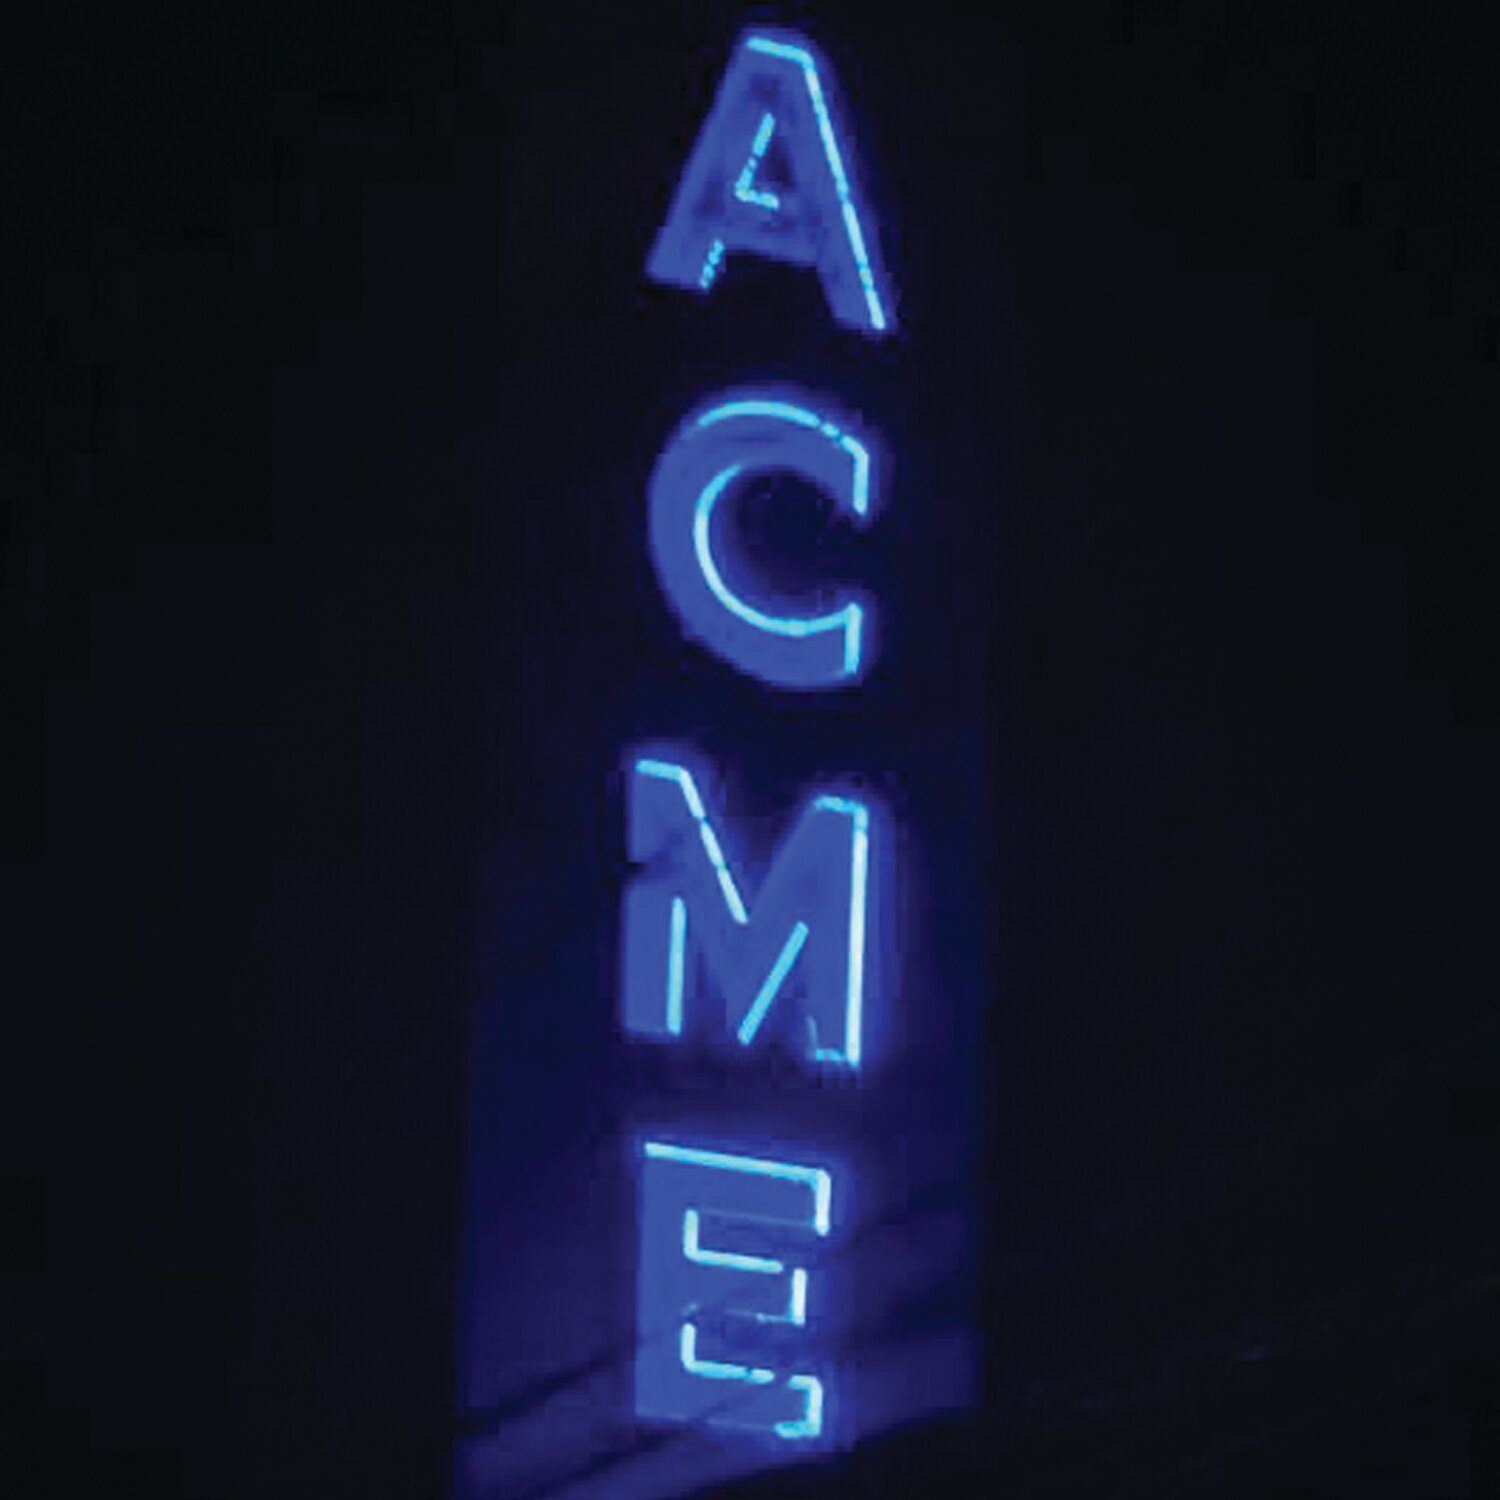 The neon sign at the screening room in Lambertville is shown.